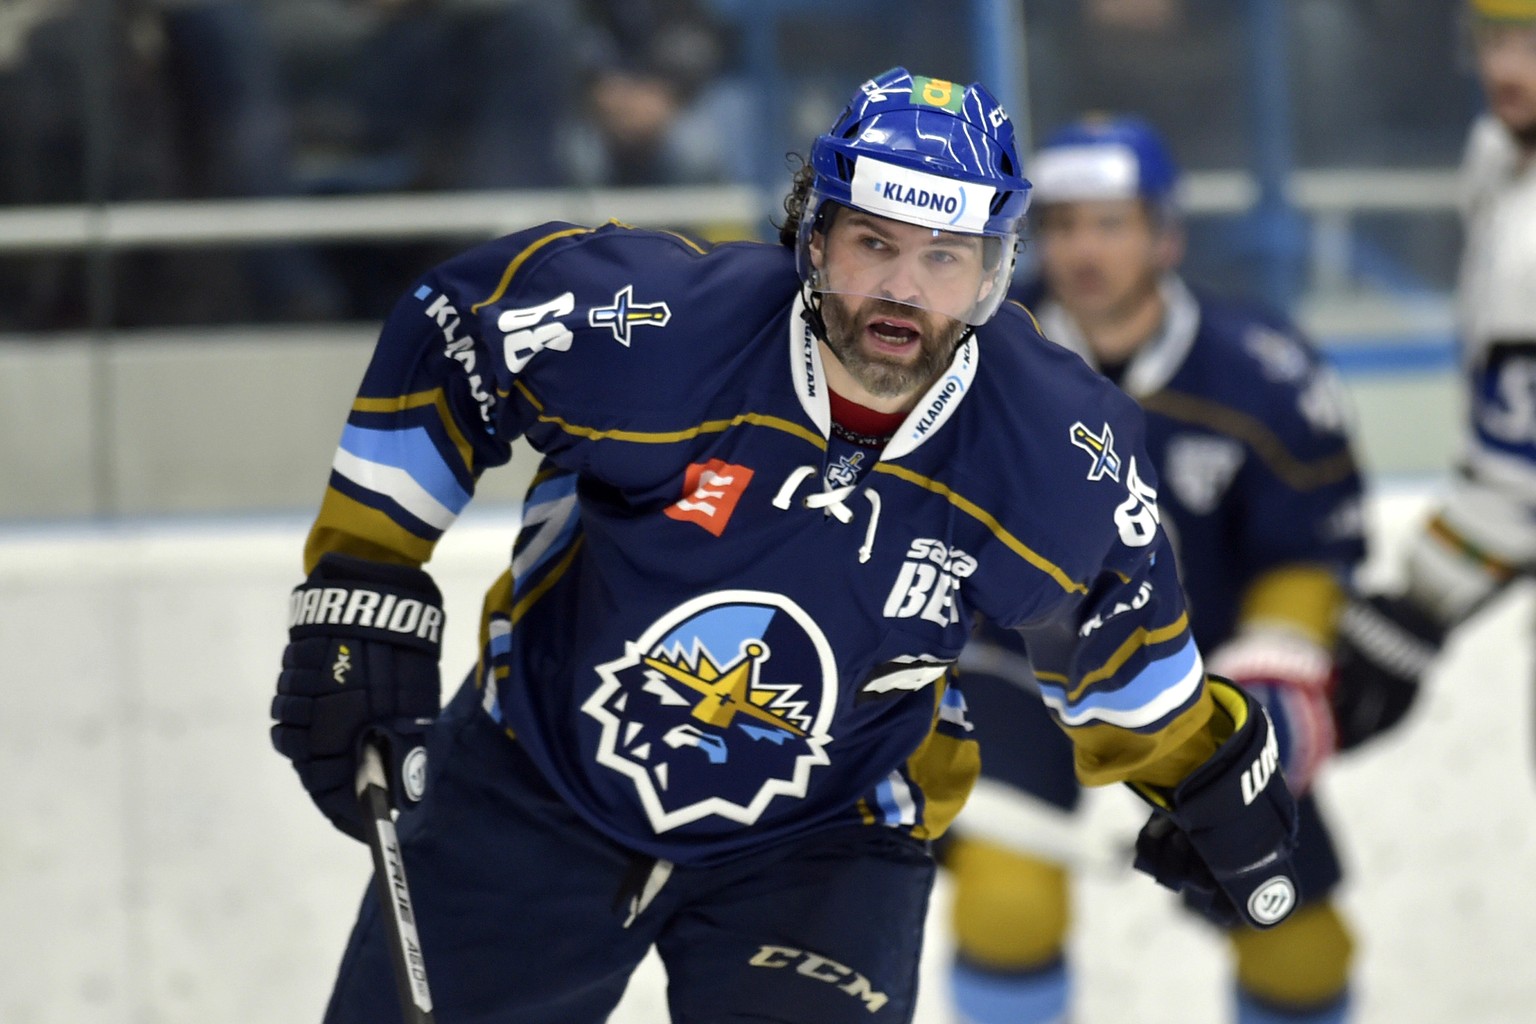 Ex-NHL player Jaromir Jagr plays for Kladno in action against Havirov team during their First Czech Hockey League match, in Havirov, Czech Republic, Monday, Feb. 18, 2019. 47-years player returned ont ...